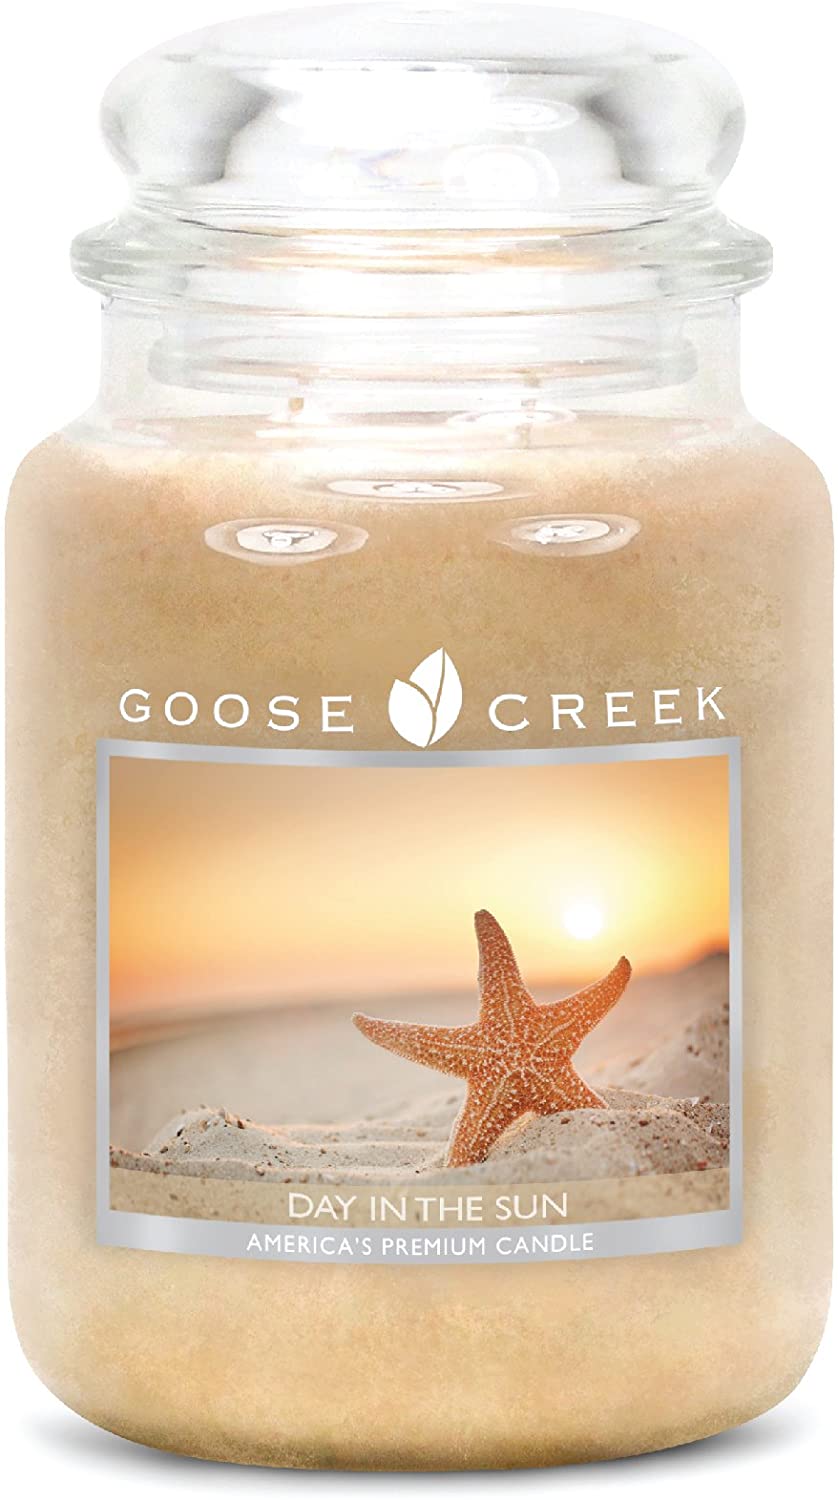 Goose Creek 24 Oz Jar Candles Day In The Sun